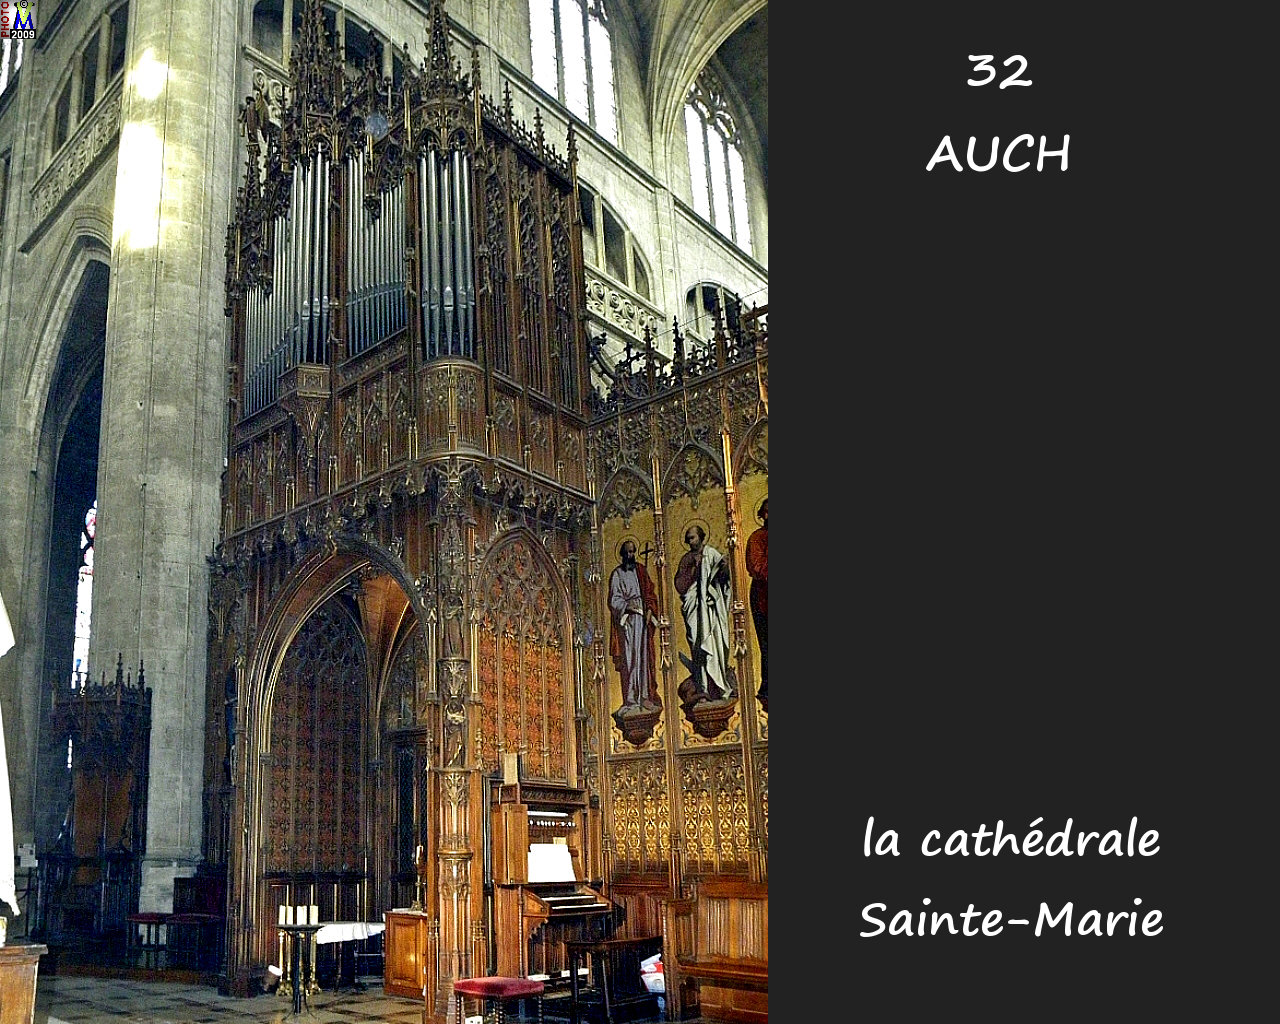 32AUCH_cathedrale_262.jpg